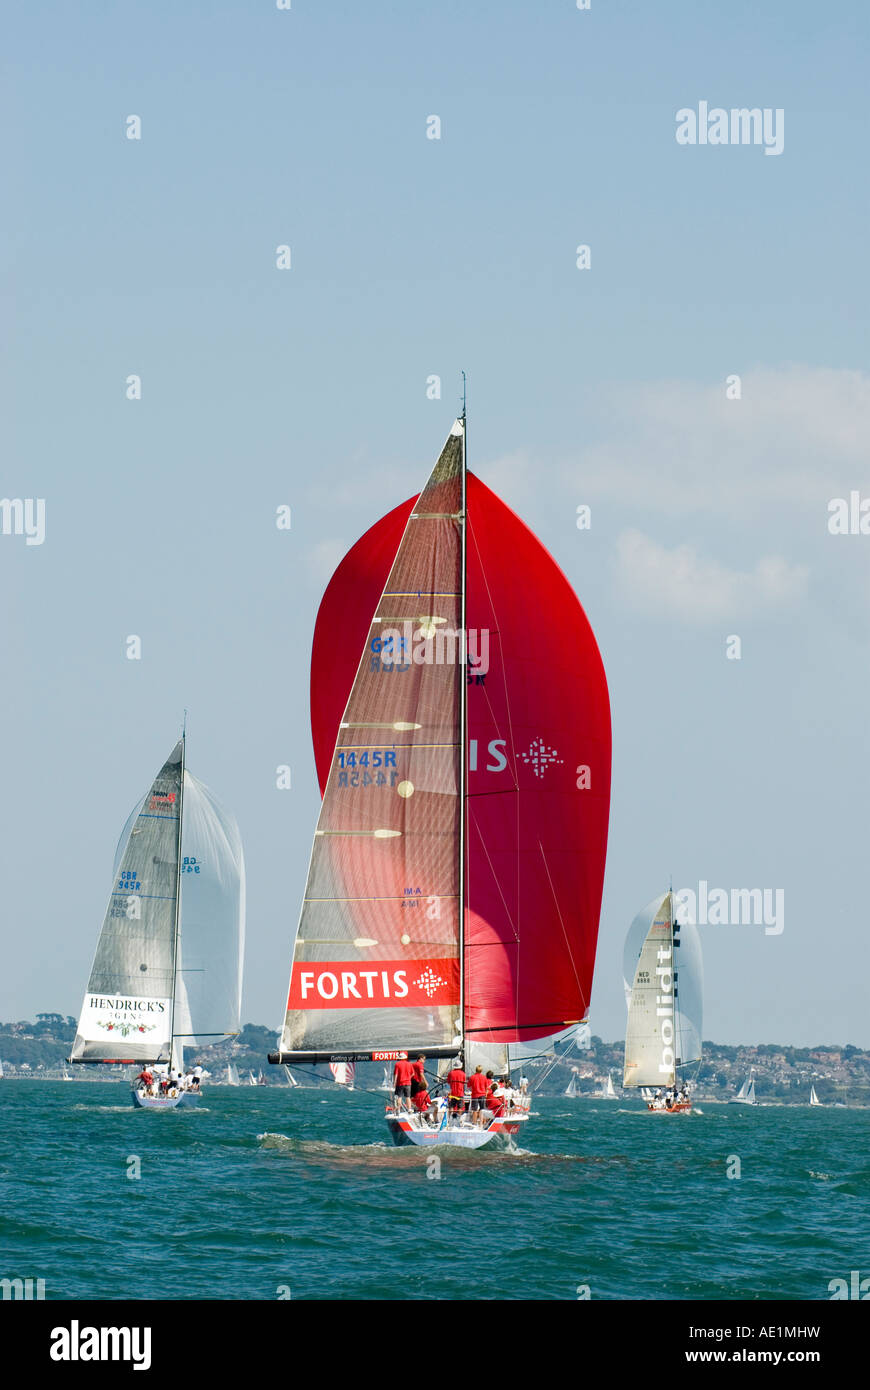 Fortis Excel the Farr 45 yacht entered by Agne V Nilsson in Cowes Week Class 2 IRC racing Stock Photo